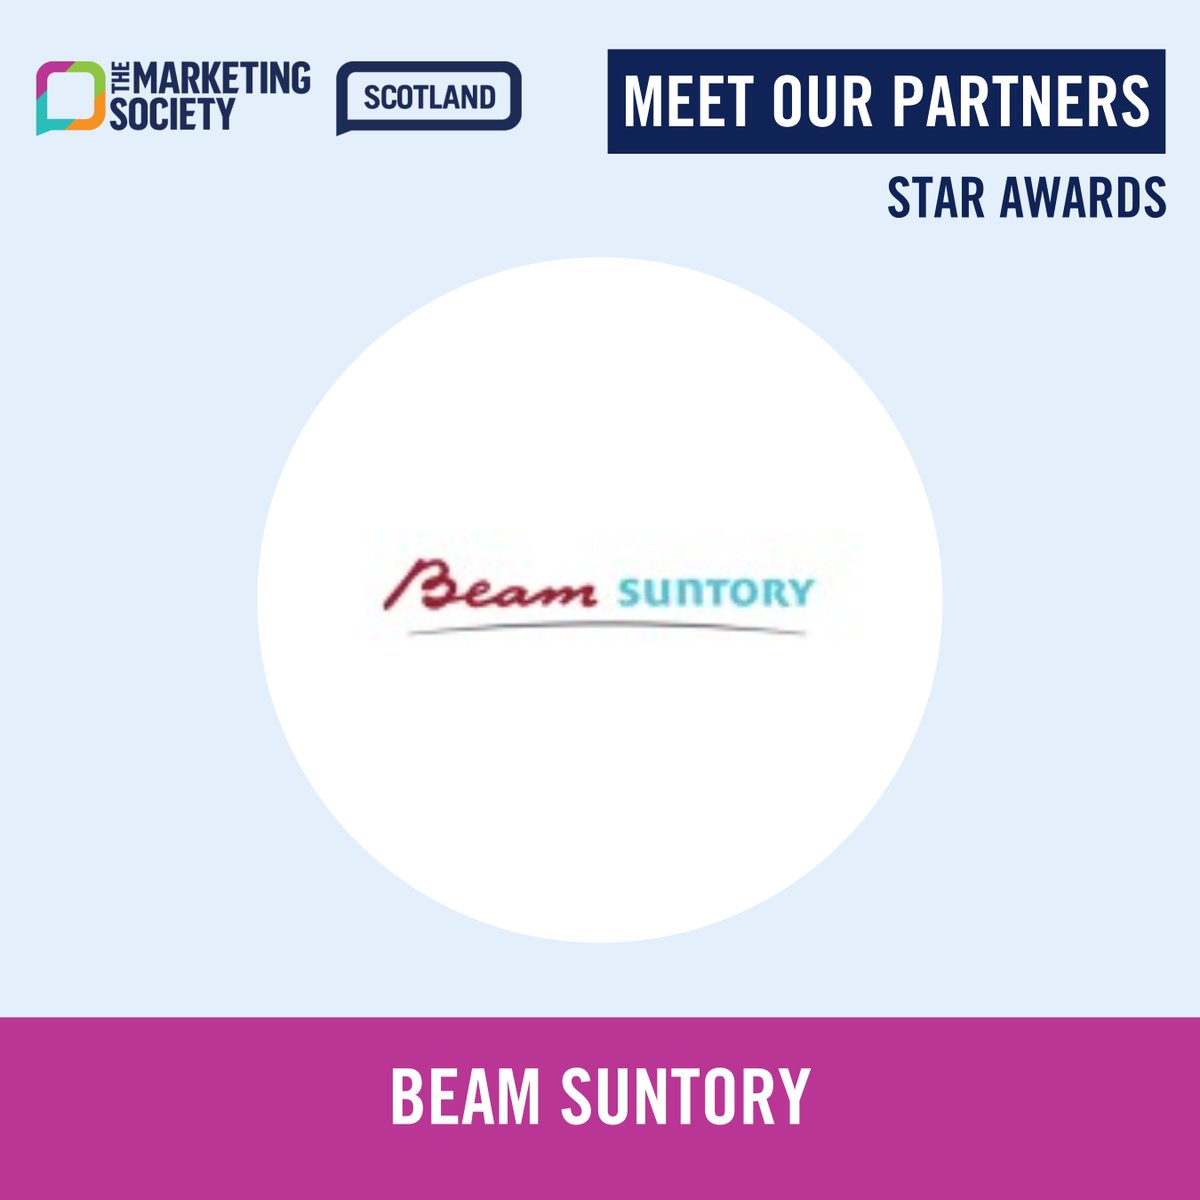 👋 Meet our Star Awards Partners @BeamSuntory are a Strategic Partner of the Star Awards and sponsor the Chairman's and Champions category. Star Awards tickets are on sale now here: loom.ly/FhkBCis